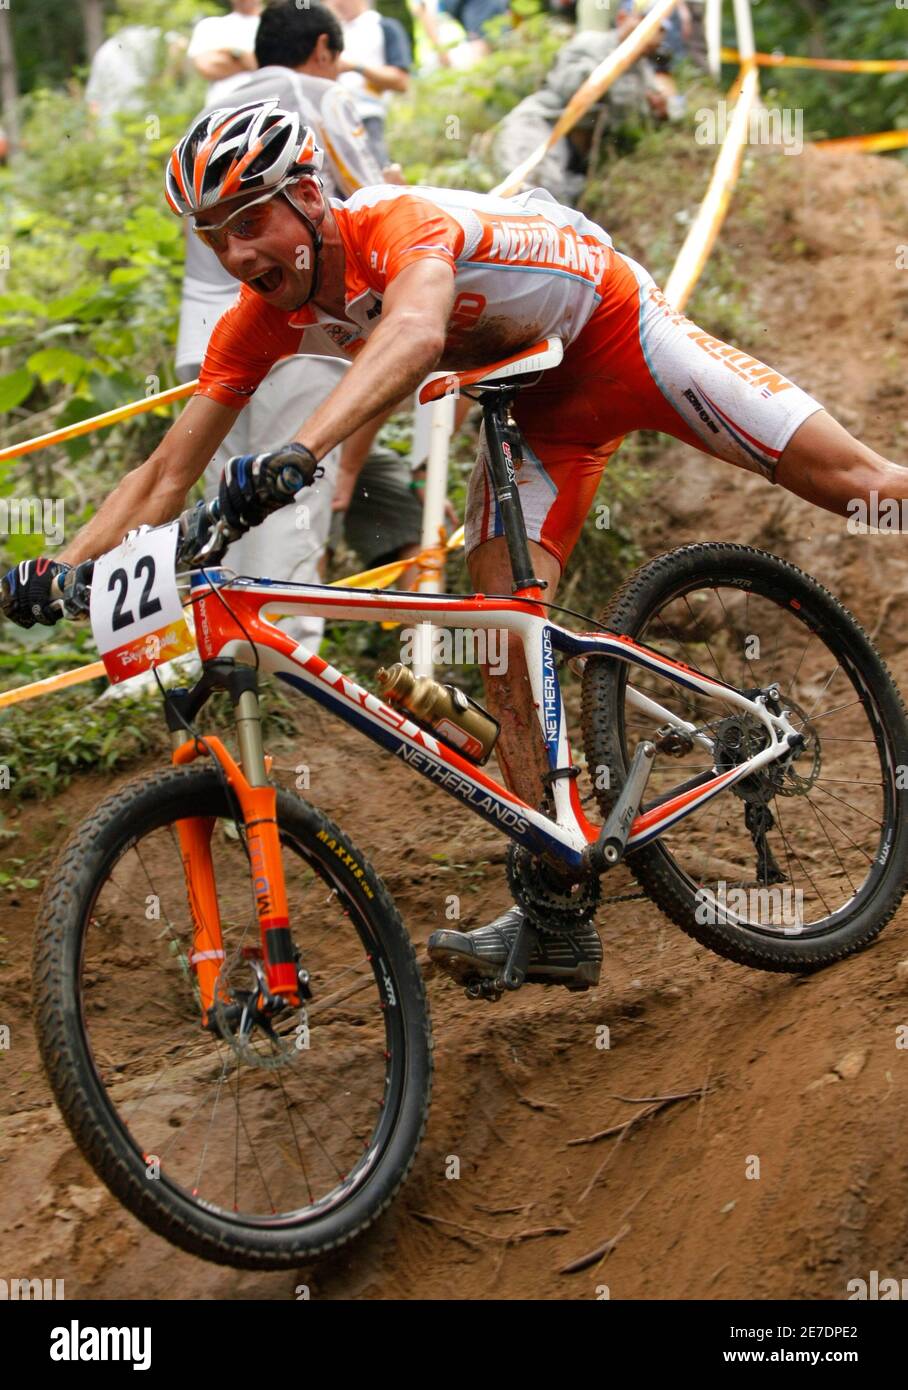 Rudi van Houts of the Netherlands competes in the men's cross-country  mountain bike cycling competition at the Beijing 2008 Olympic Games August  23, 2008. REUTERS/Tim Wimborne (CHINA Stock Photo - Alamy